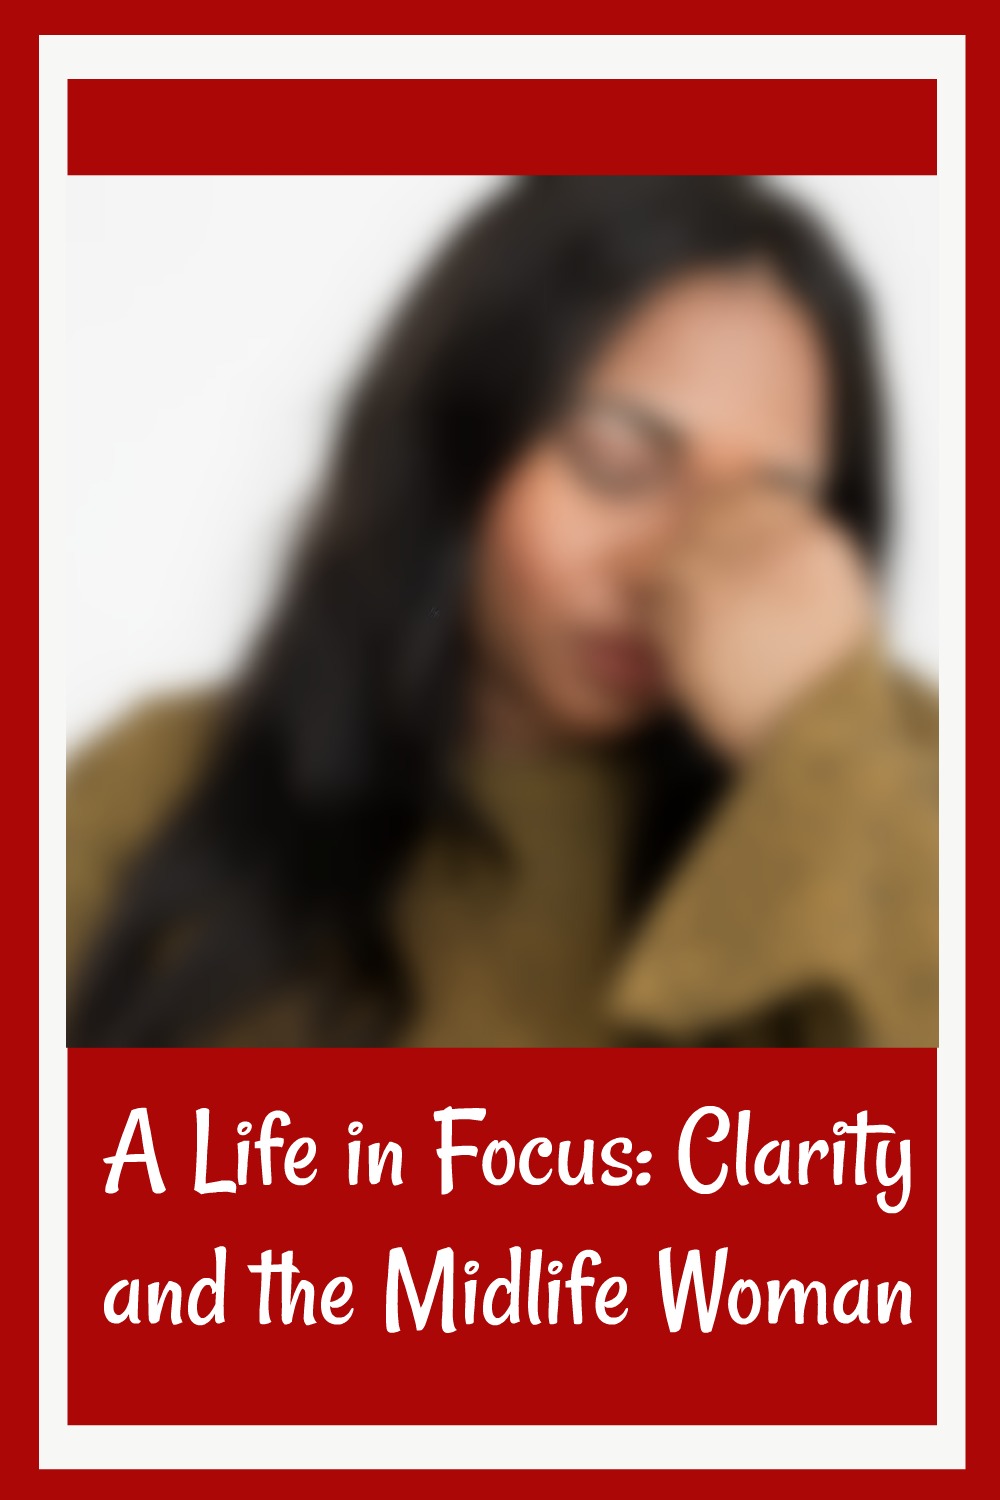 A Life in Focus: Clarity and the Midlife Woman